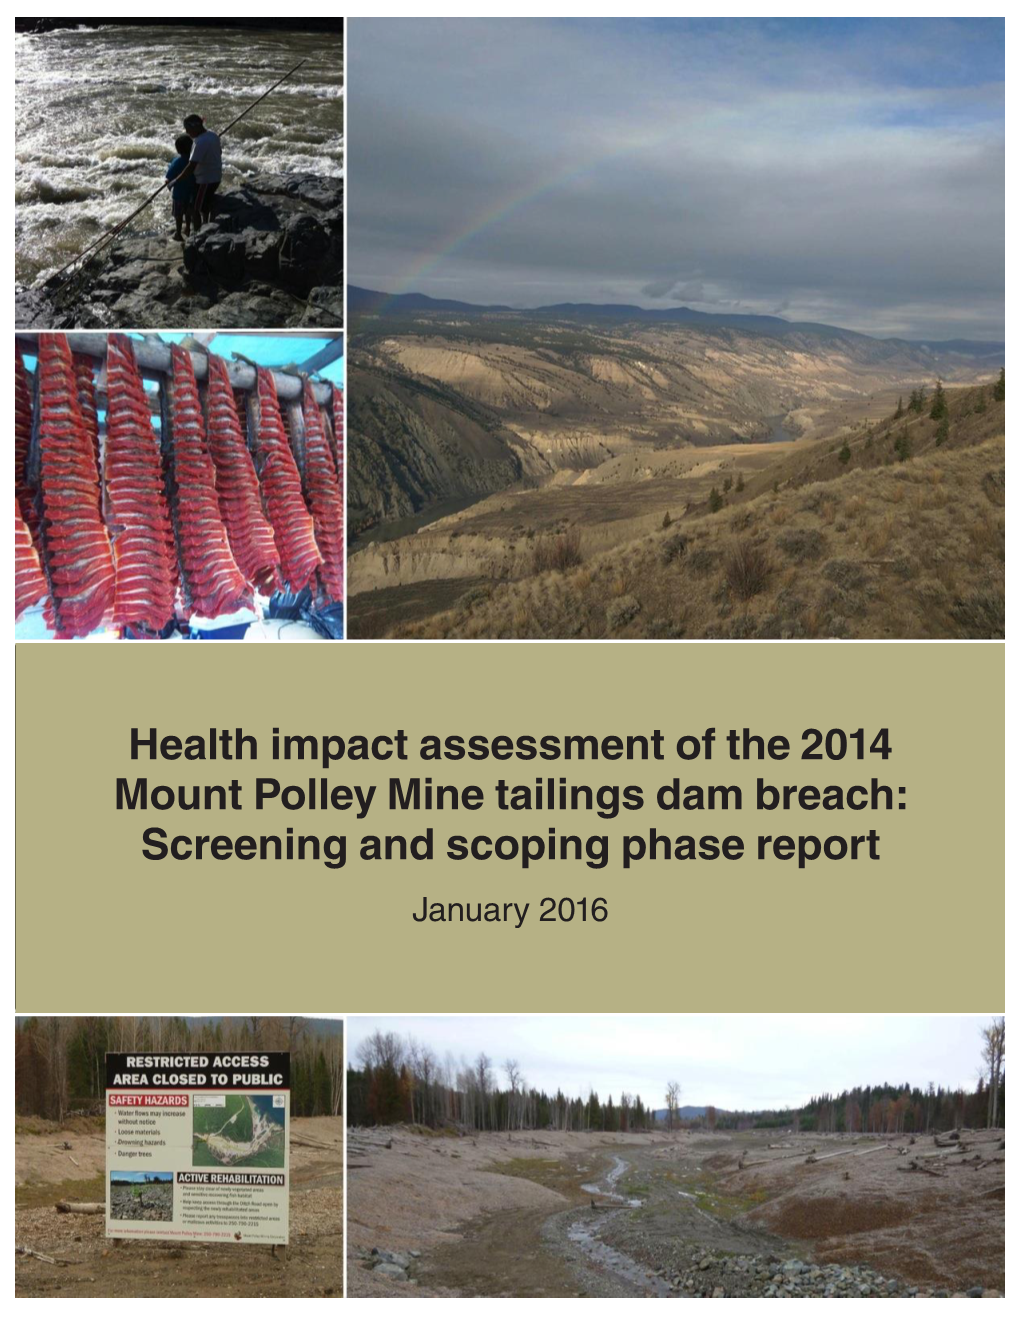 Health Impact Assessment of the 2014 Mount Polley Mine Tailings Dam